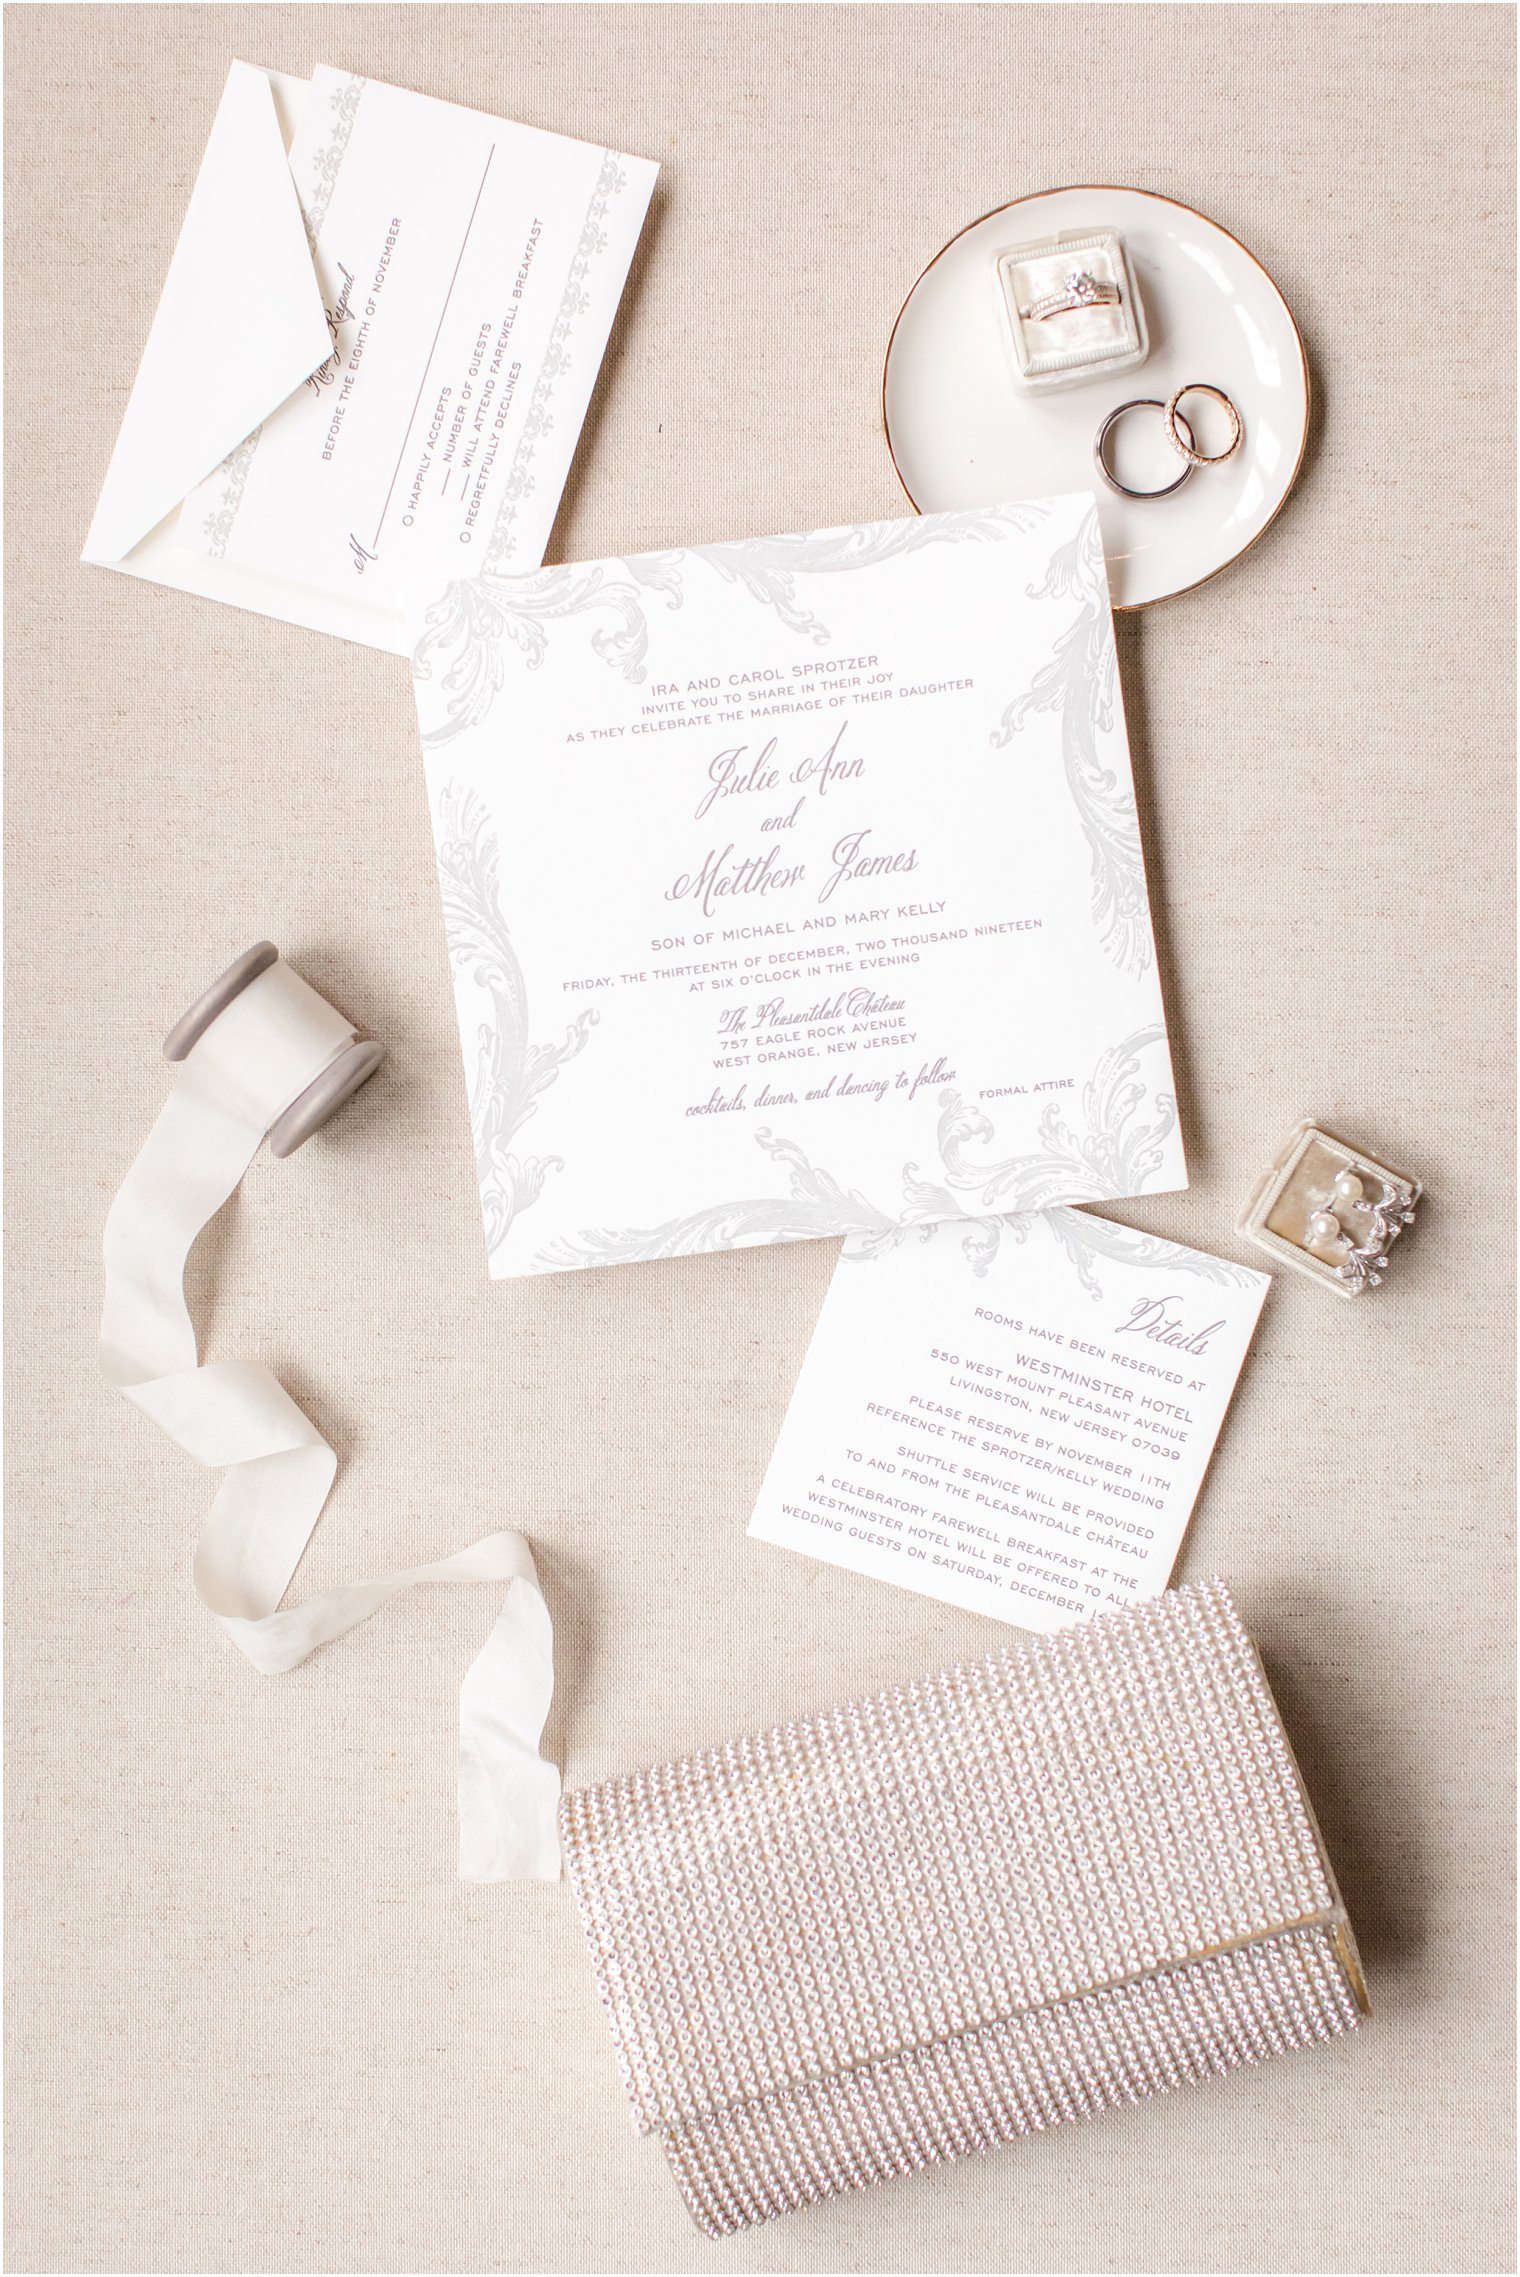 Elegant white and silver wedding invitation for a winter wedding at Pleasantdale Chateau | Photo by Idalia Photography